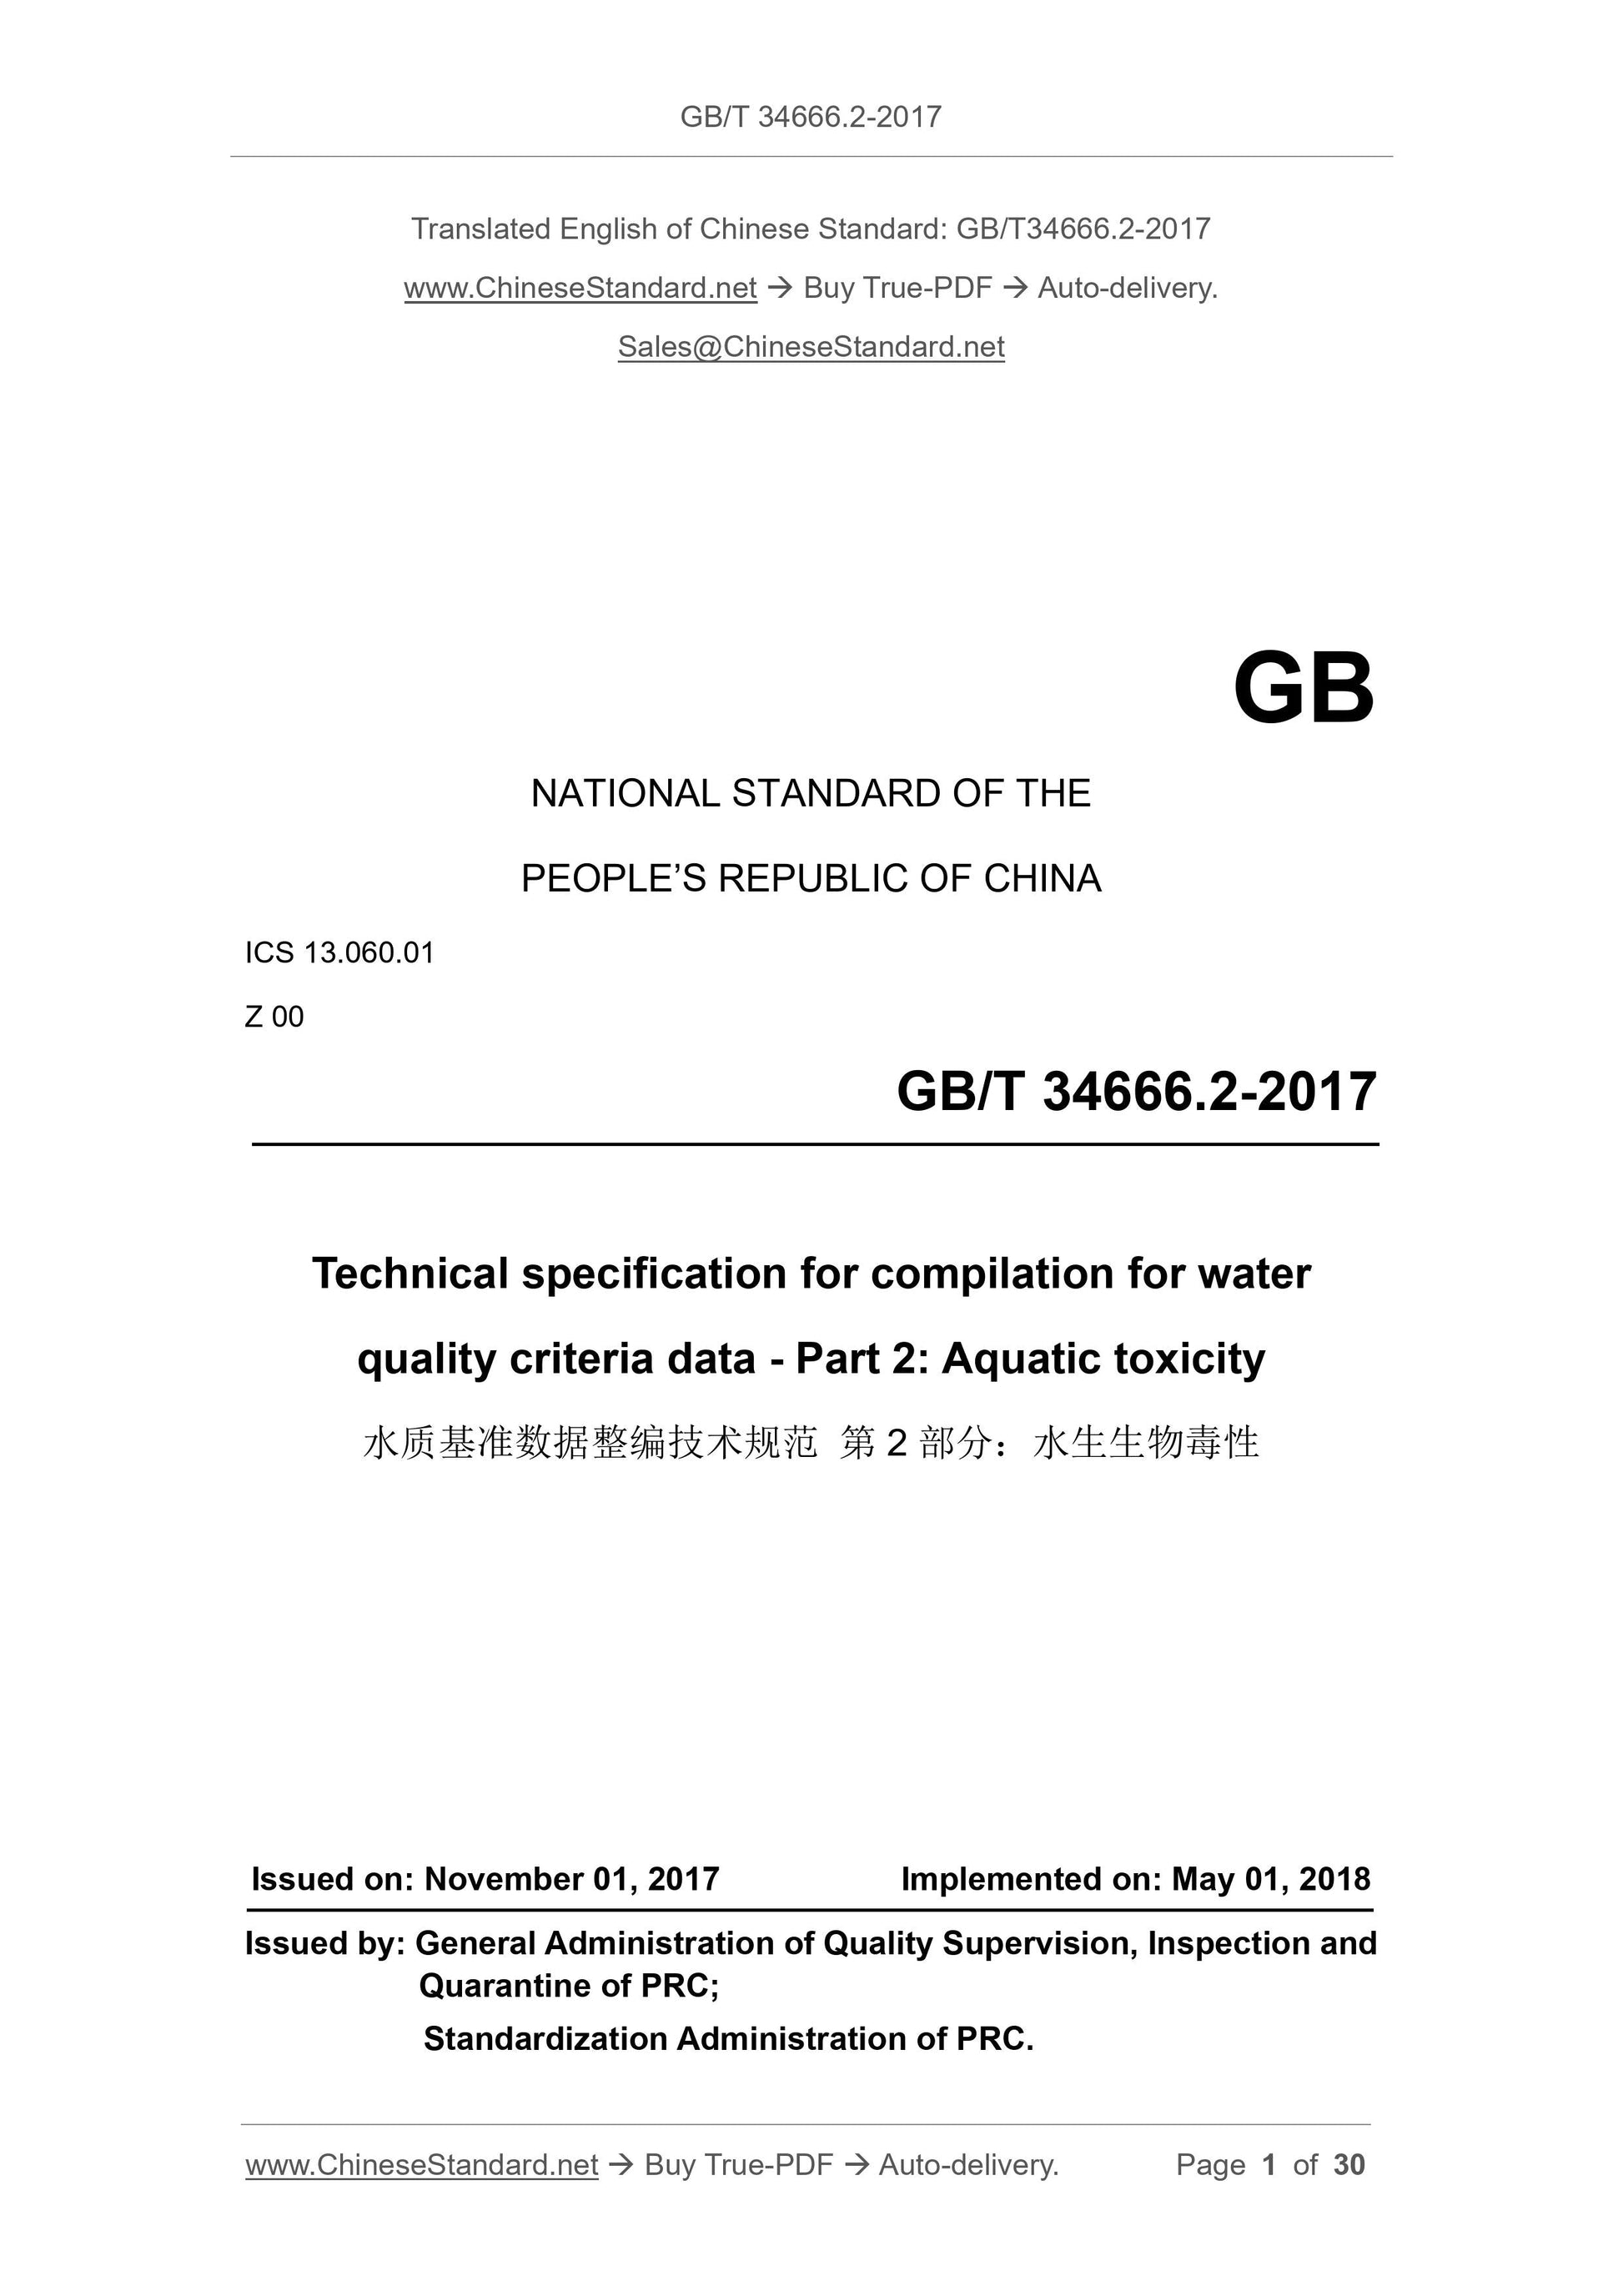 GB/T 34666.2-2017 Page 1